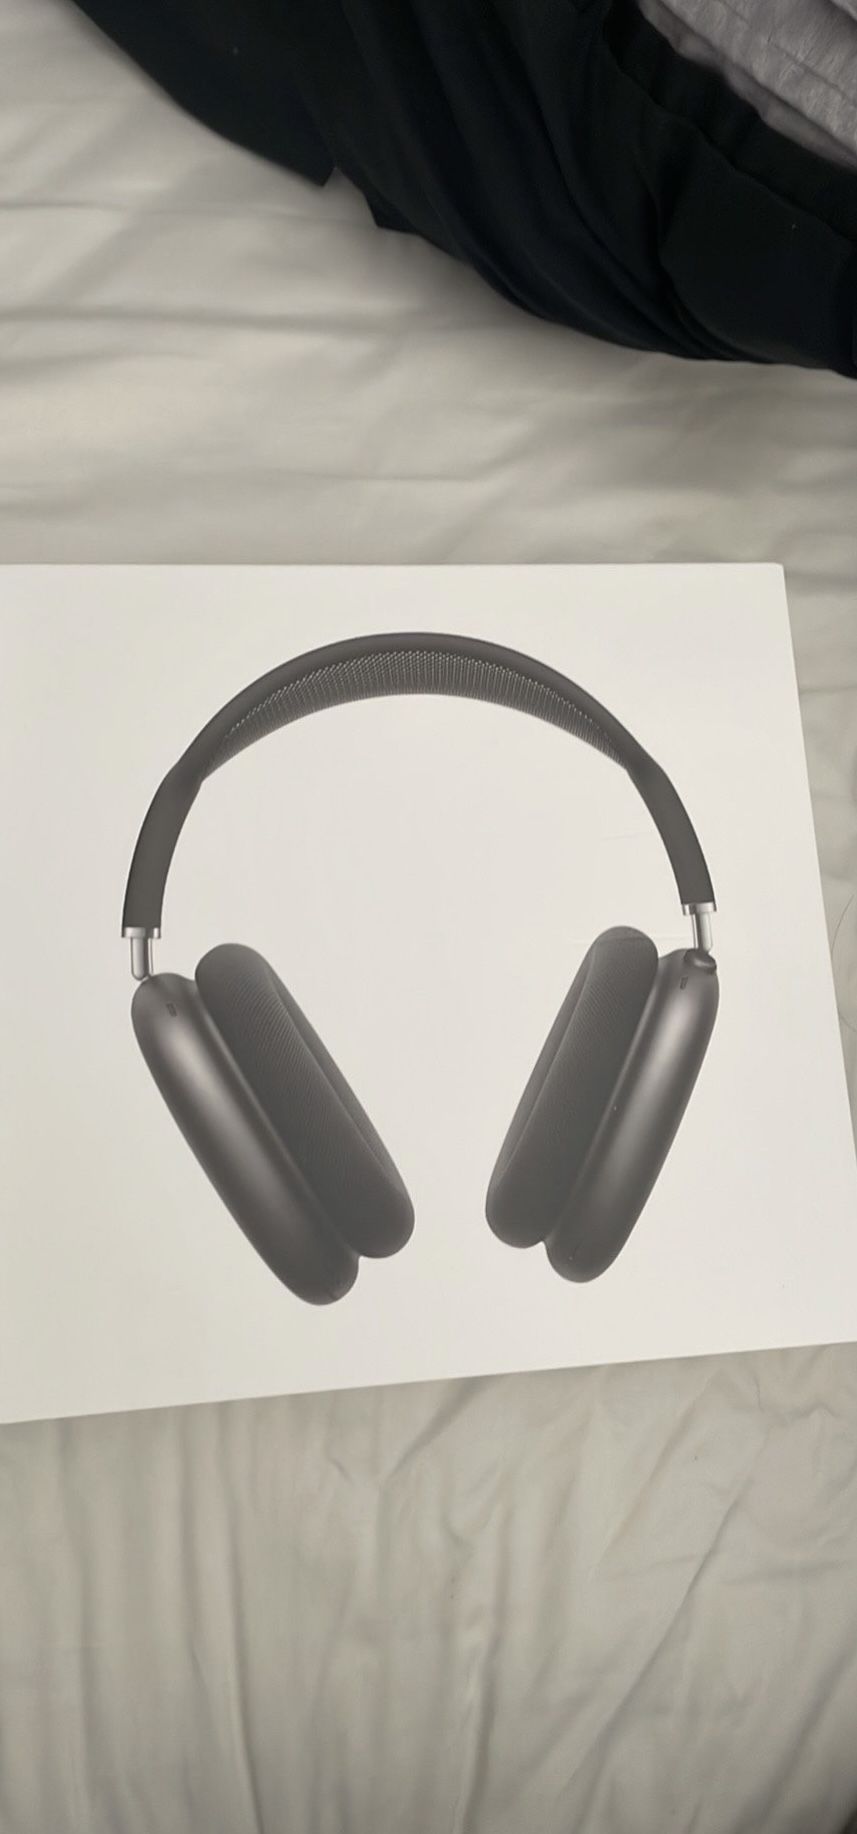 Brand New AirPod Max ( Space Grey)